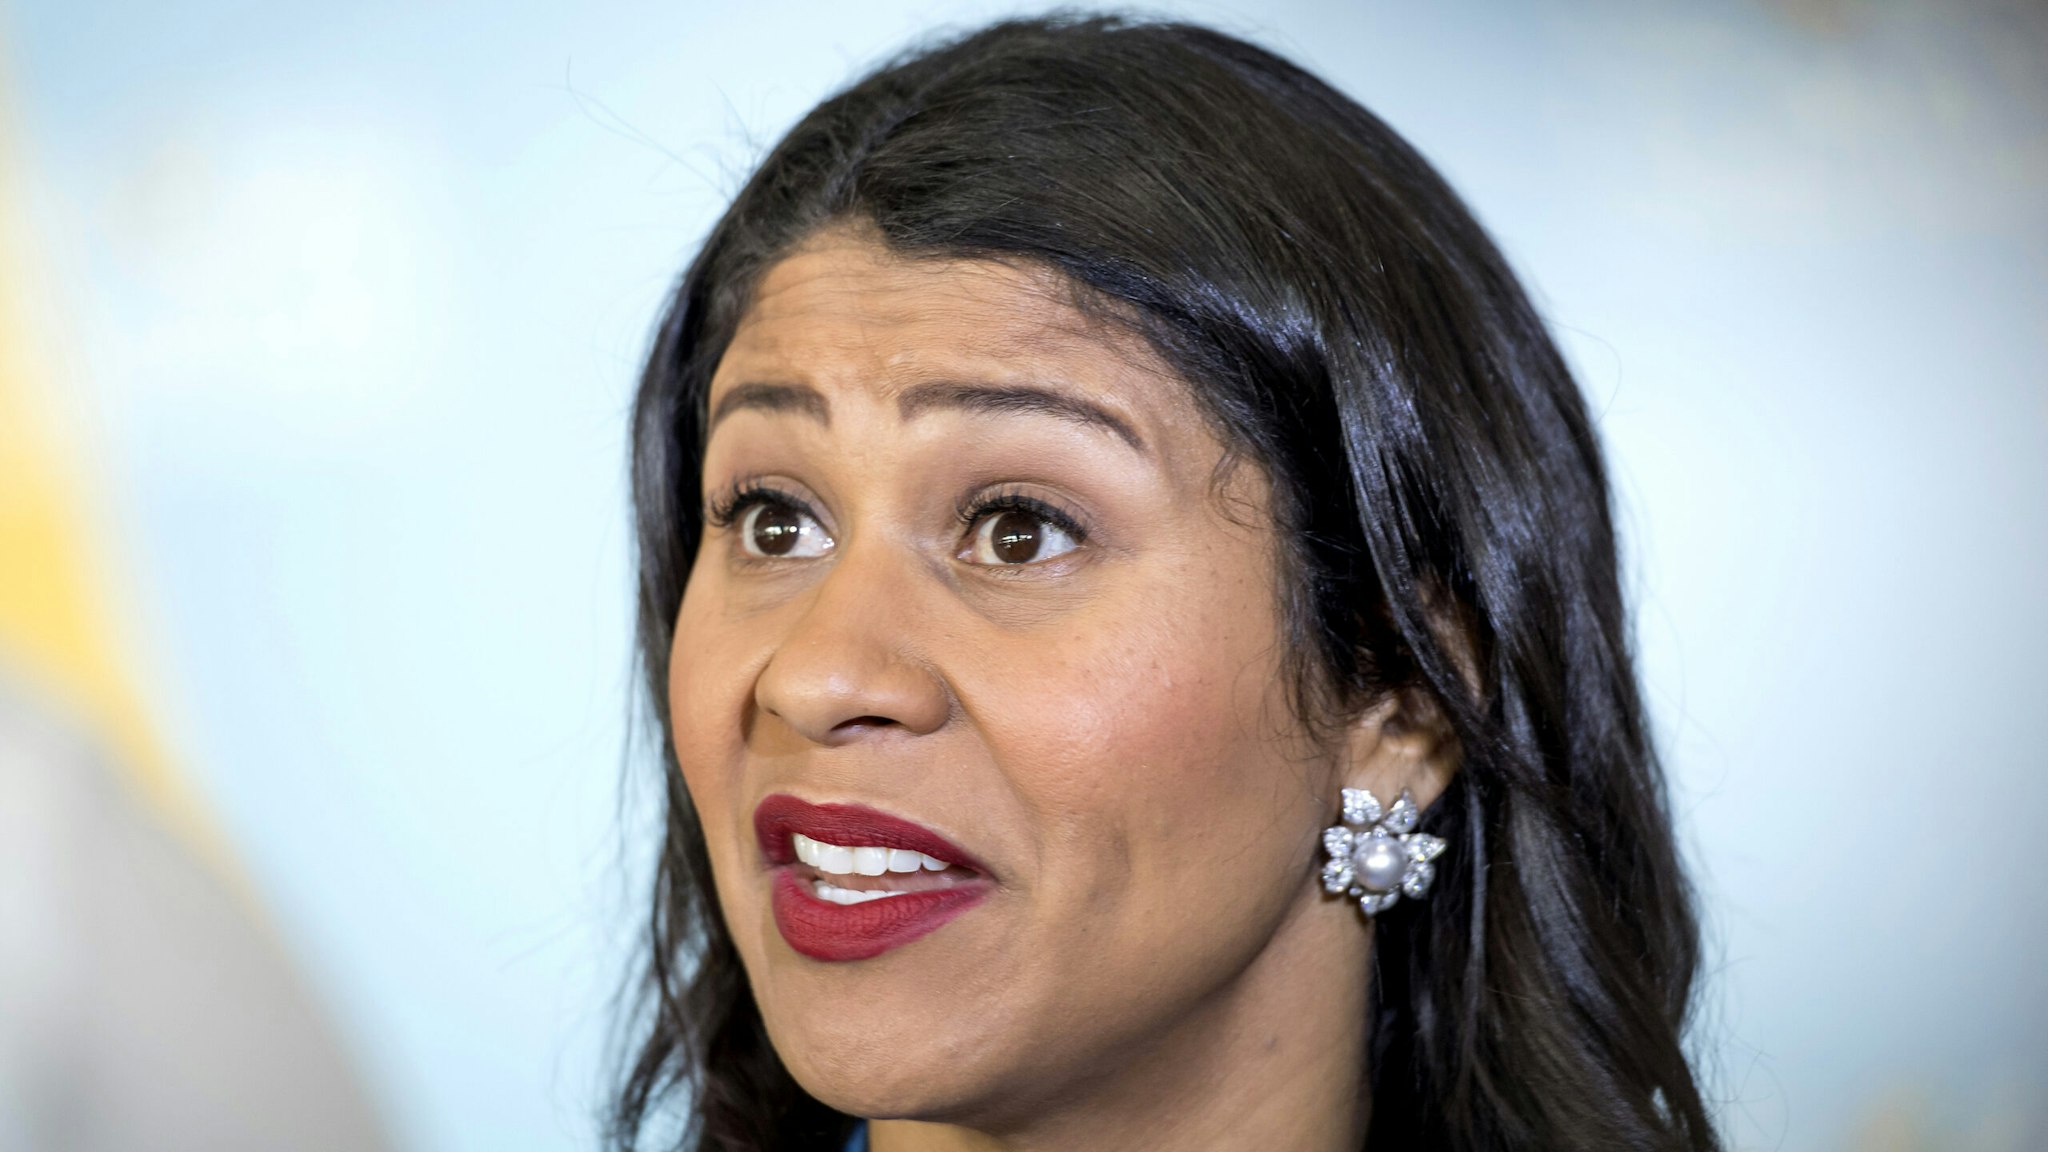 London Breed, mayor of San Francisco, speaks during an interview at the Global Climate Action Summit in San Francisco, California, U.S., on Thursday, Sept. 13, 2018. The event brings together industry and political leaders working on improving the conditions and concerns facing climate in the world today.